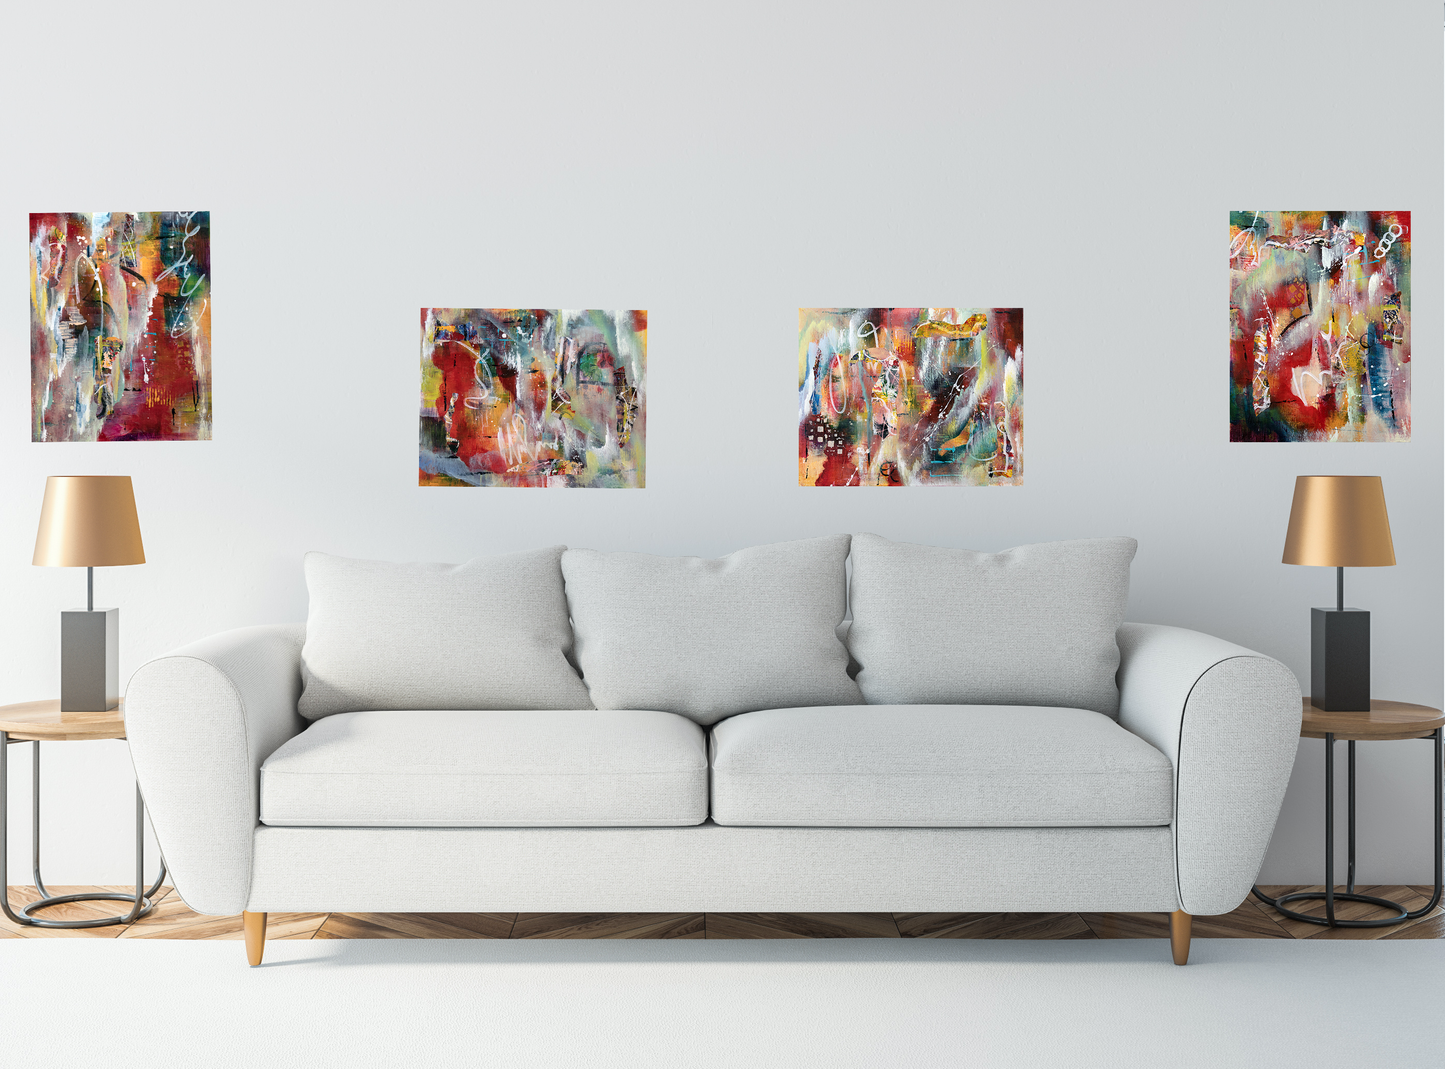 Red Hots #1 - Four Pieces - Sold in Sets of 2 (24x24 Gallery Wrapped Canvas)